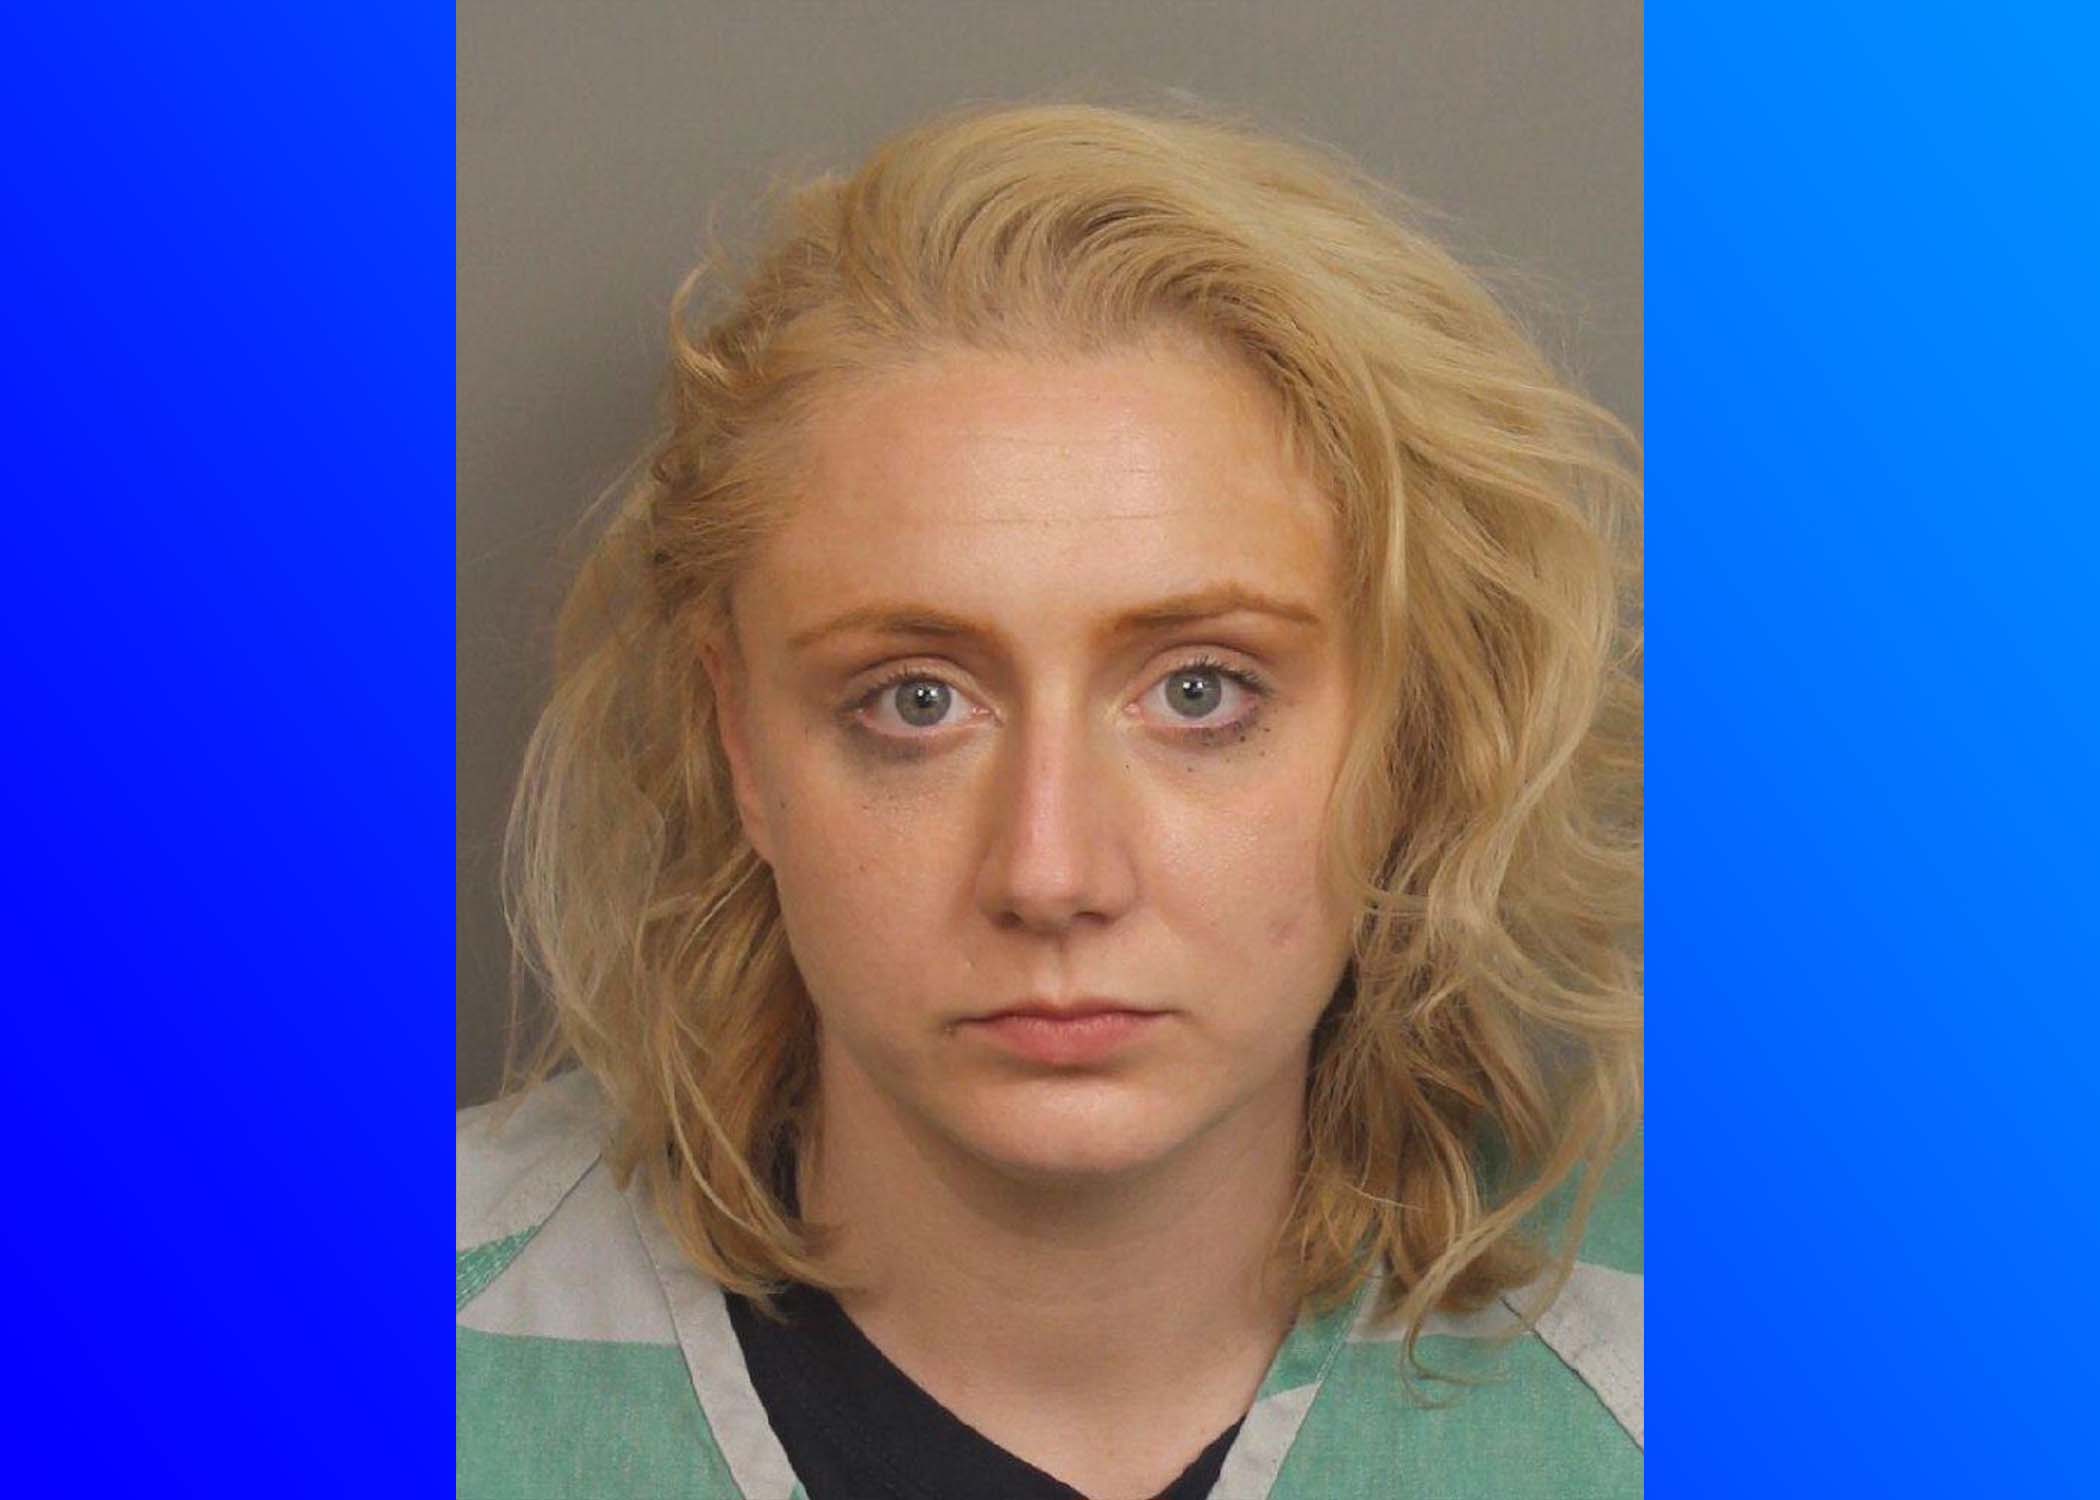 Homewood Police charge woman involved homicide investigation